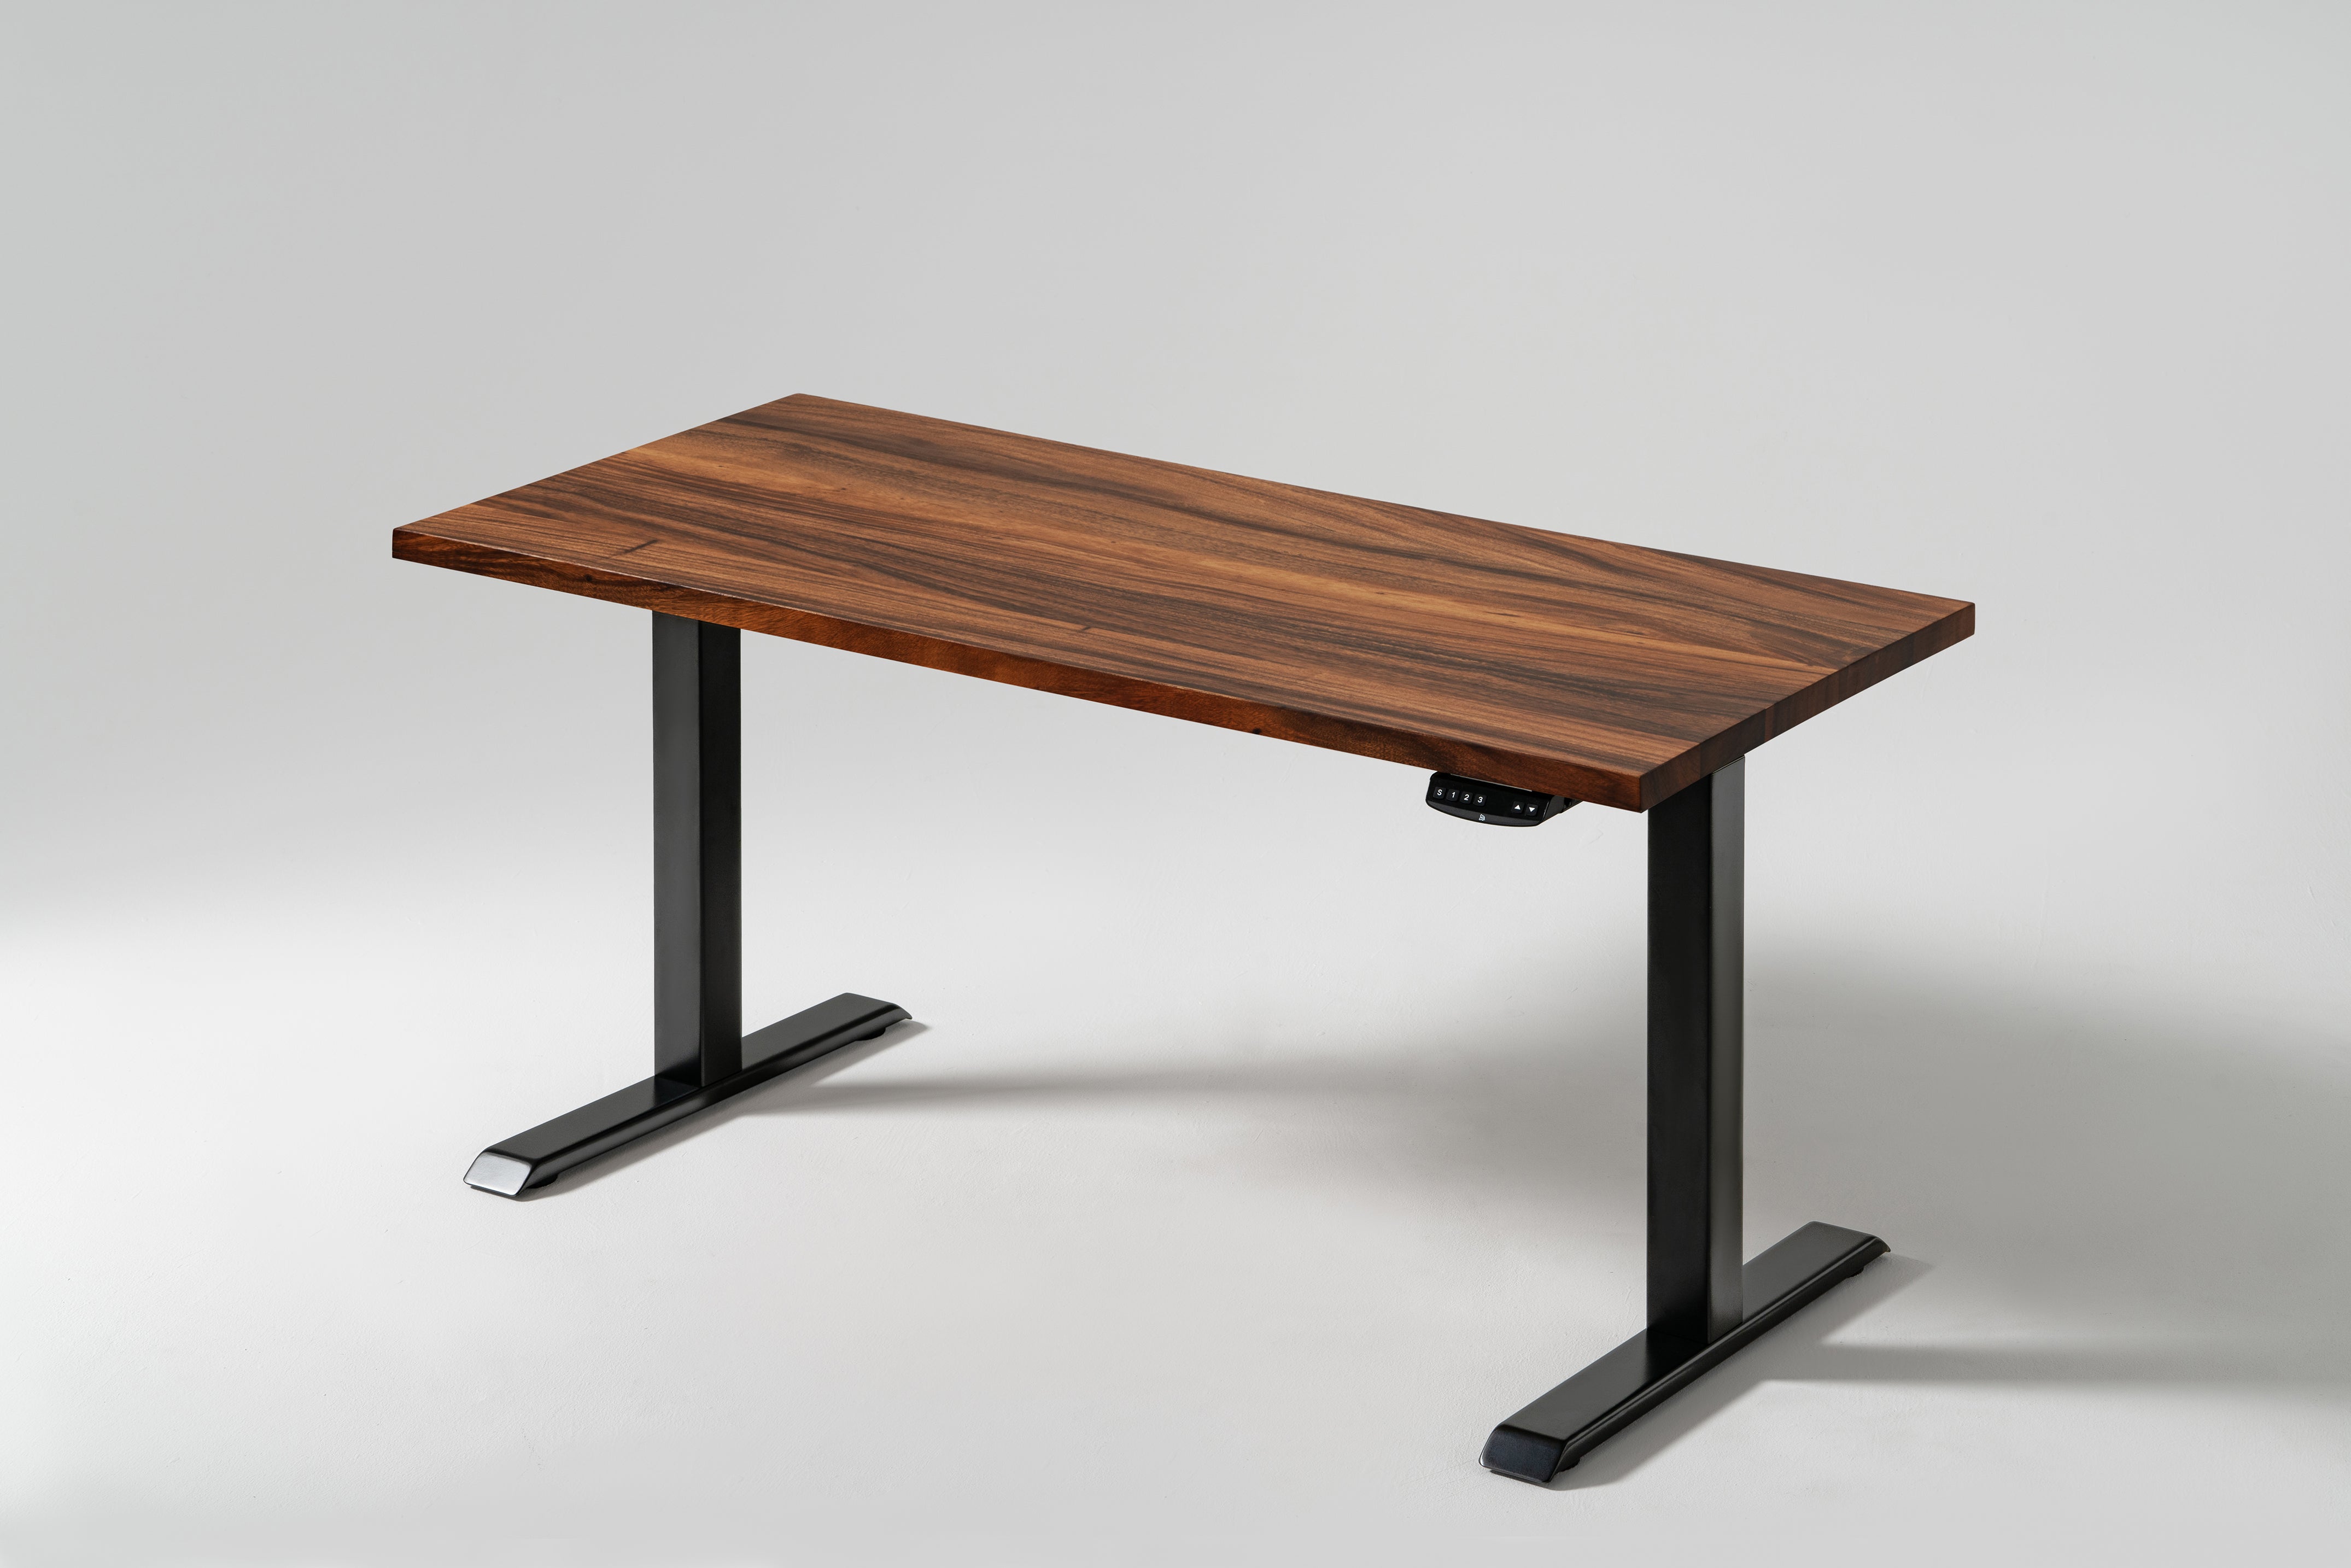 adjustable desk, Discover trusted products